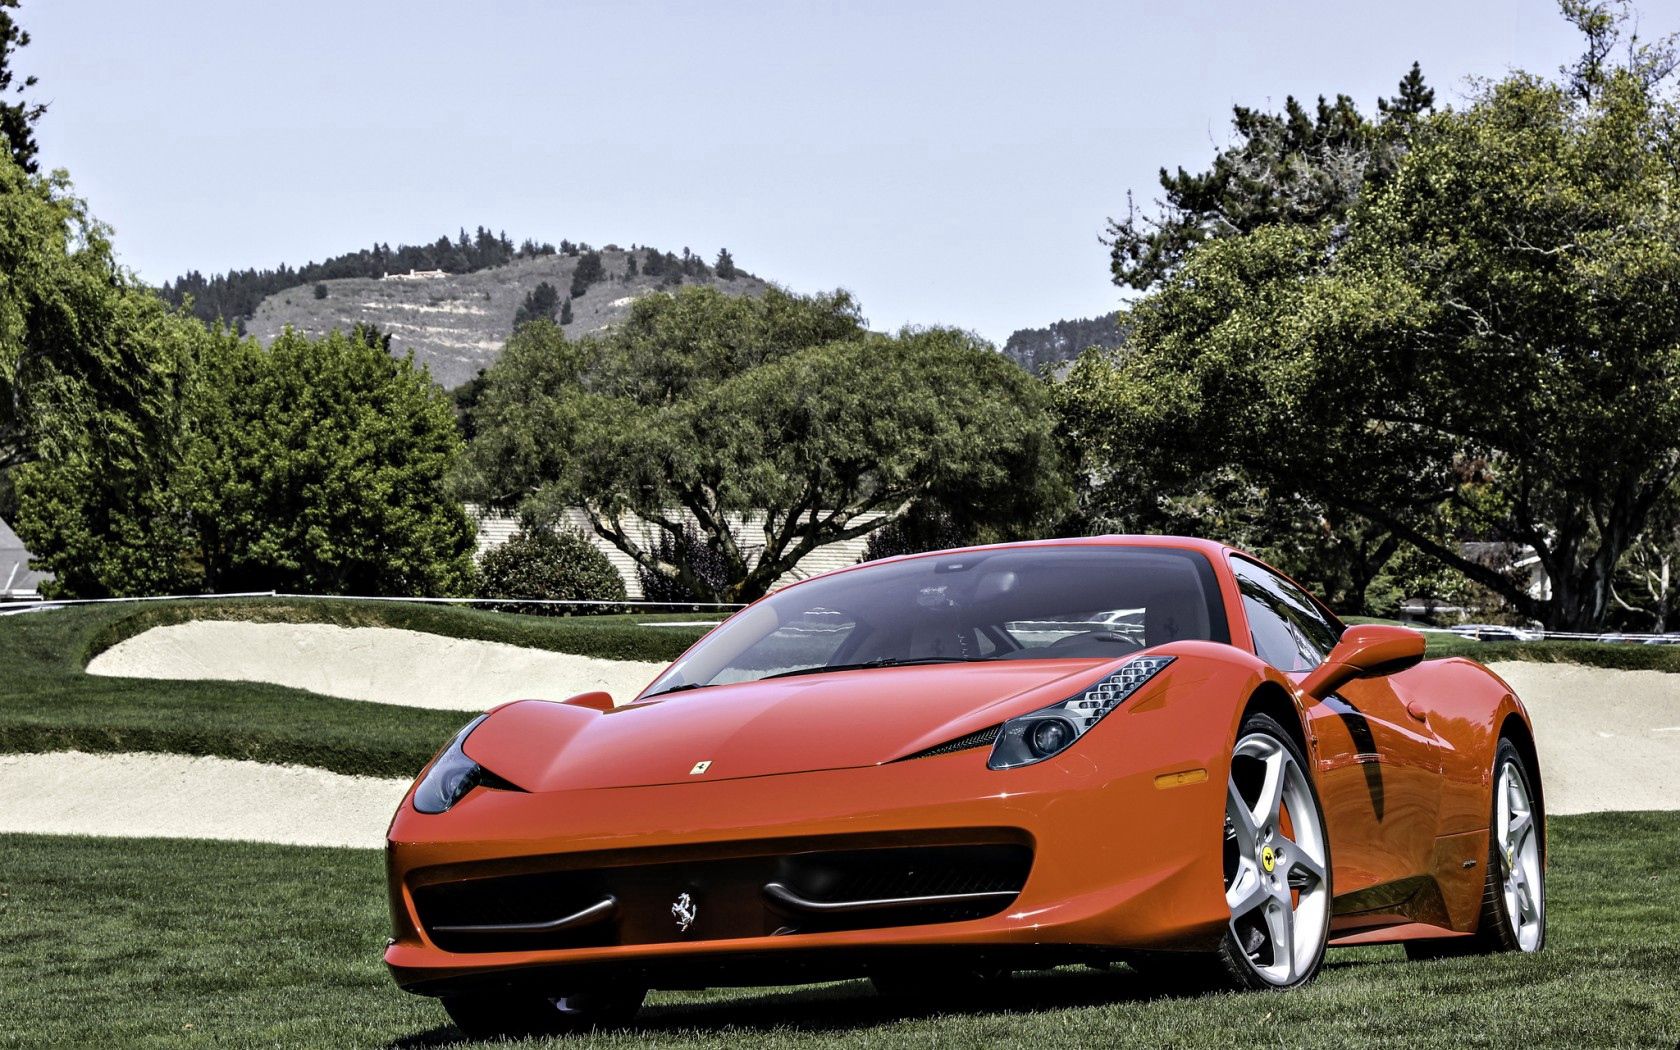 italy, trees, sky, ferrari, cars, red, field High Definition image